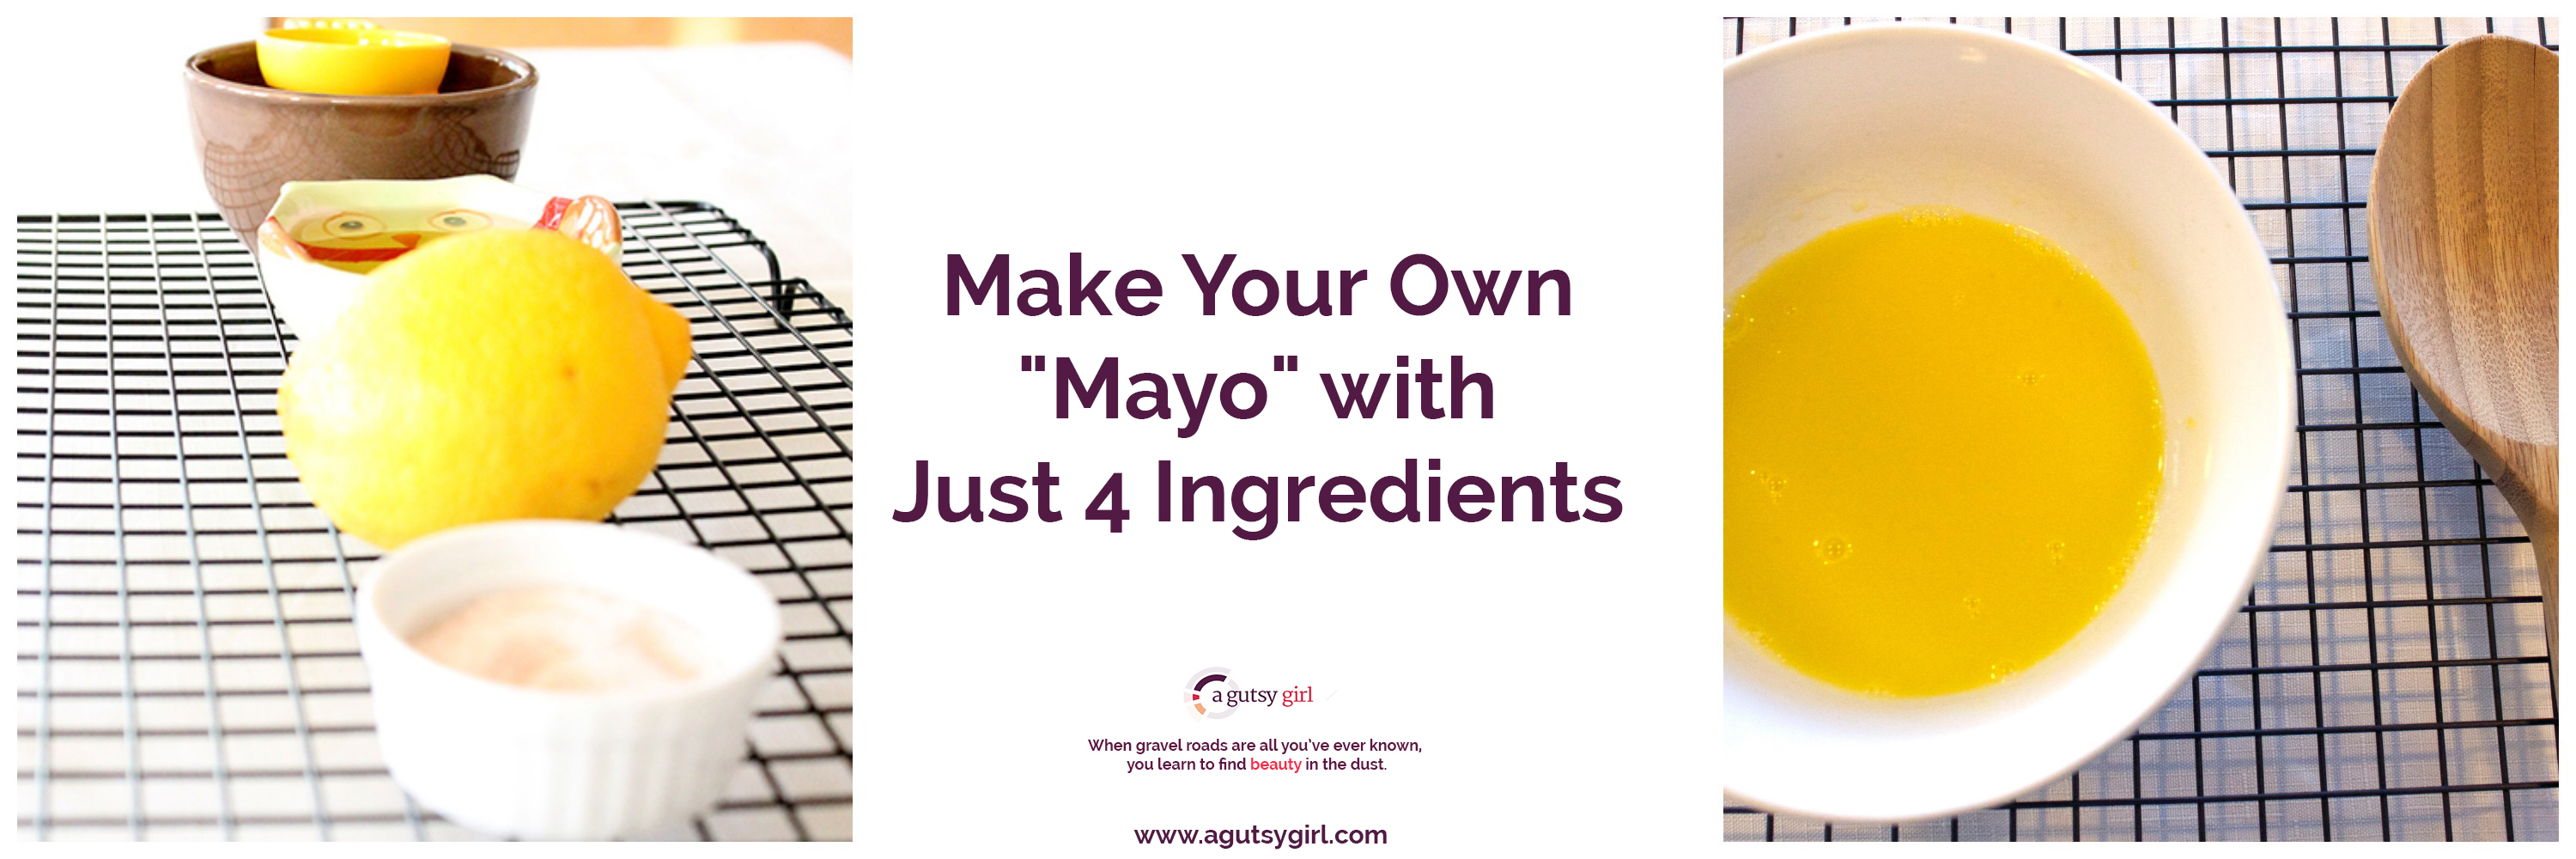 Make Your Own Mayo with Just 4 Ingredients